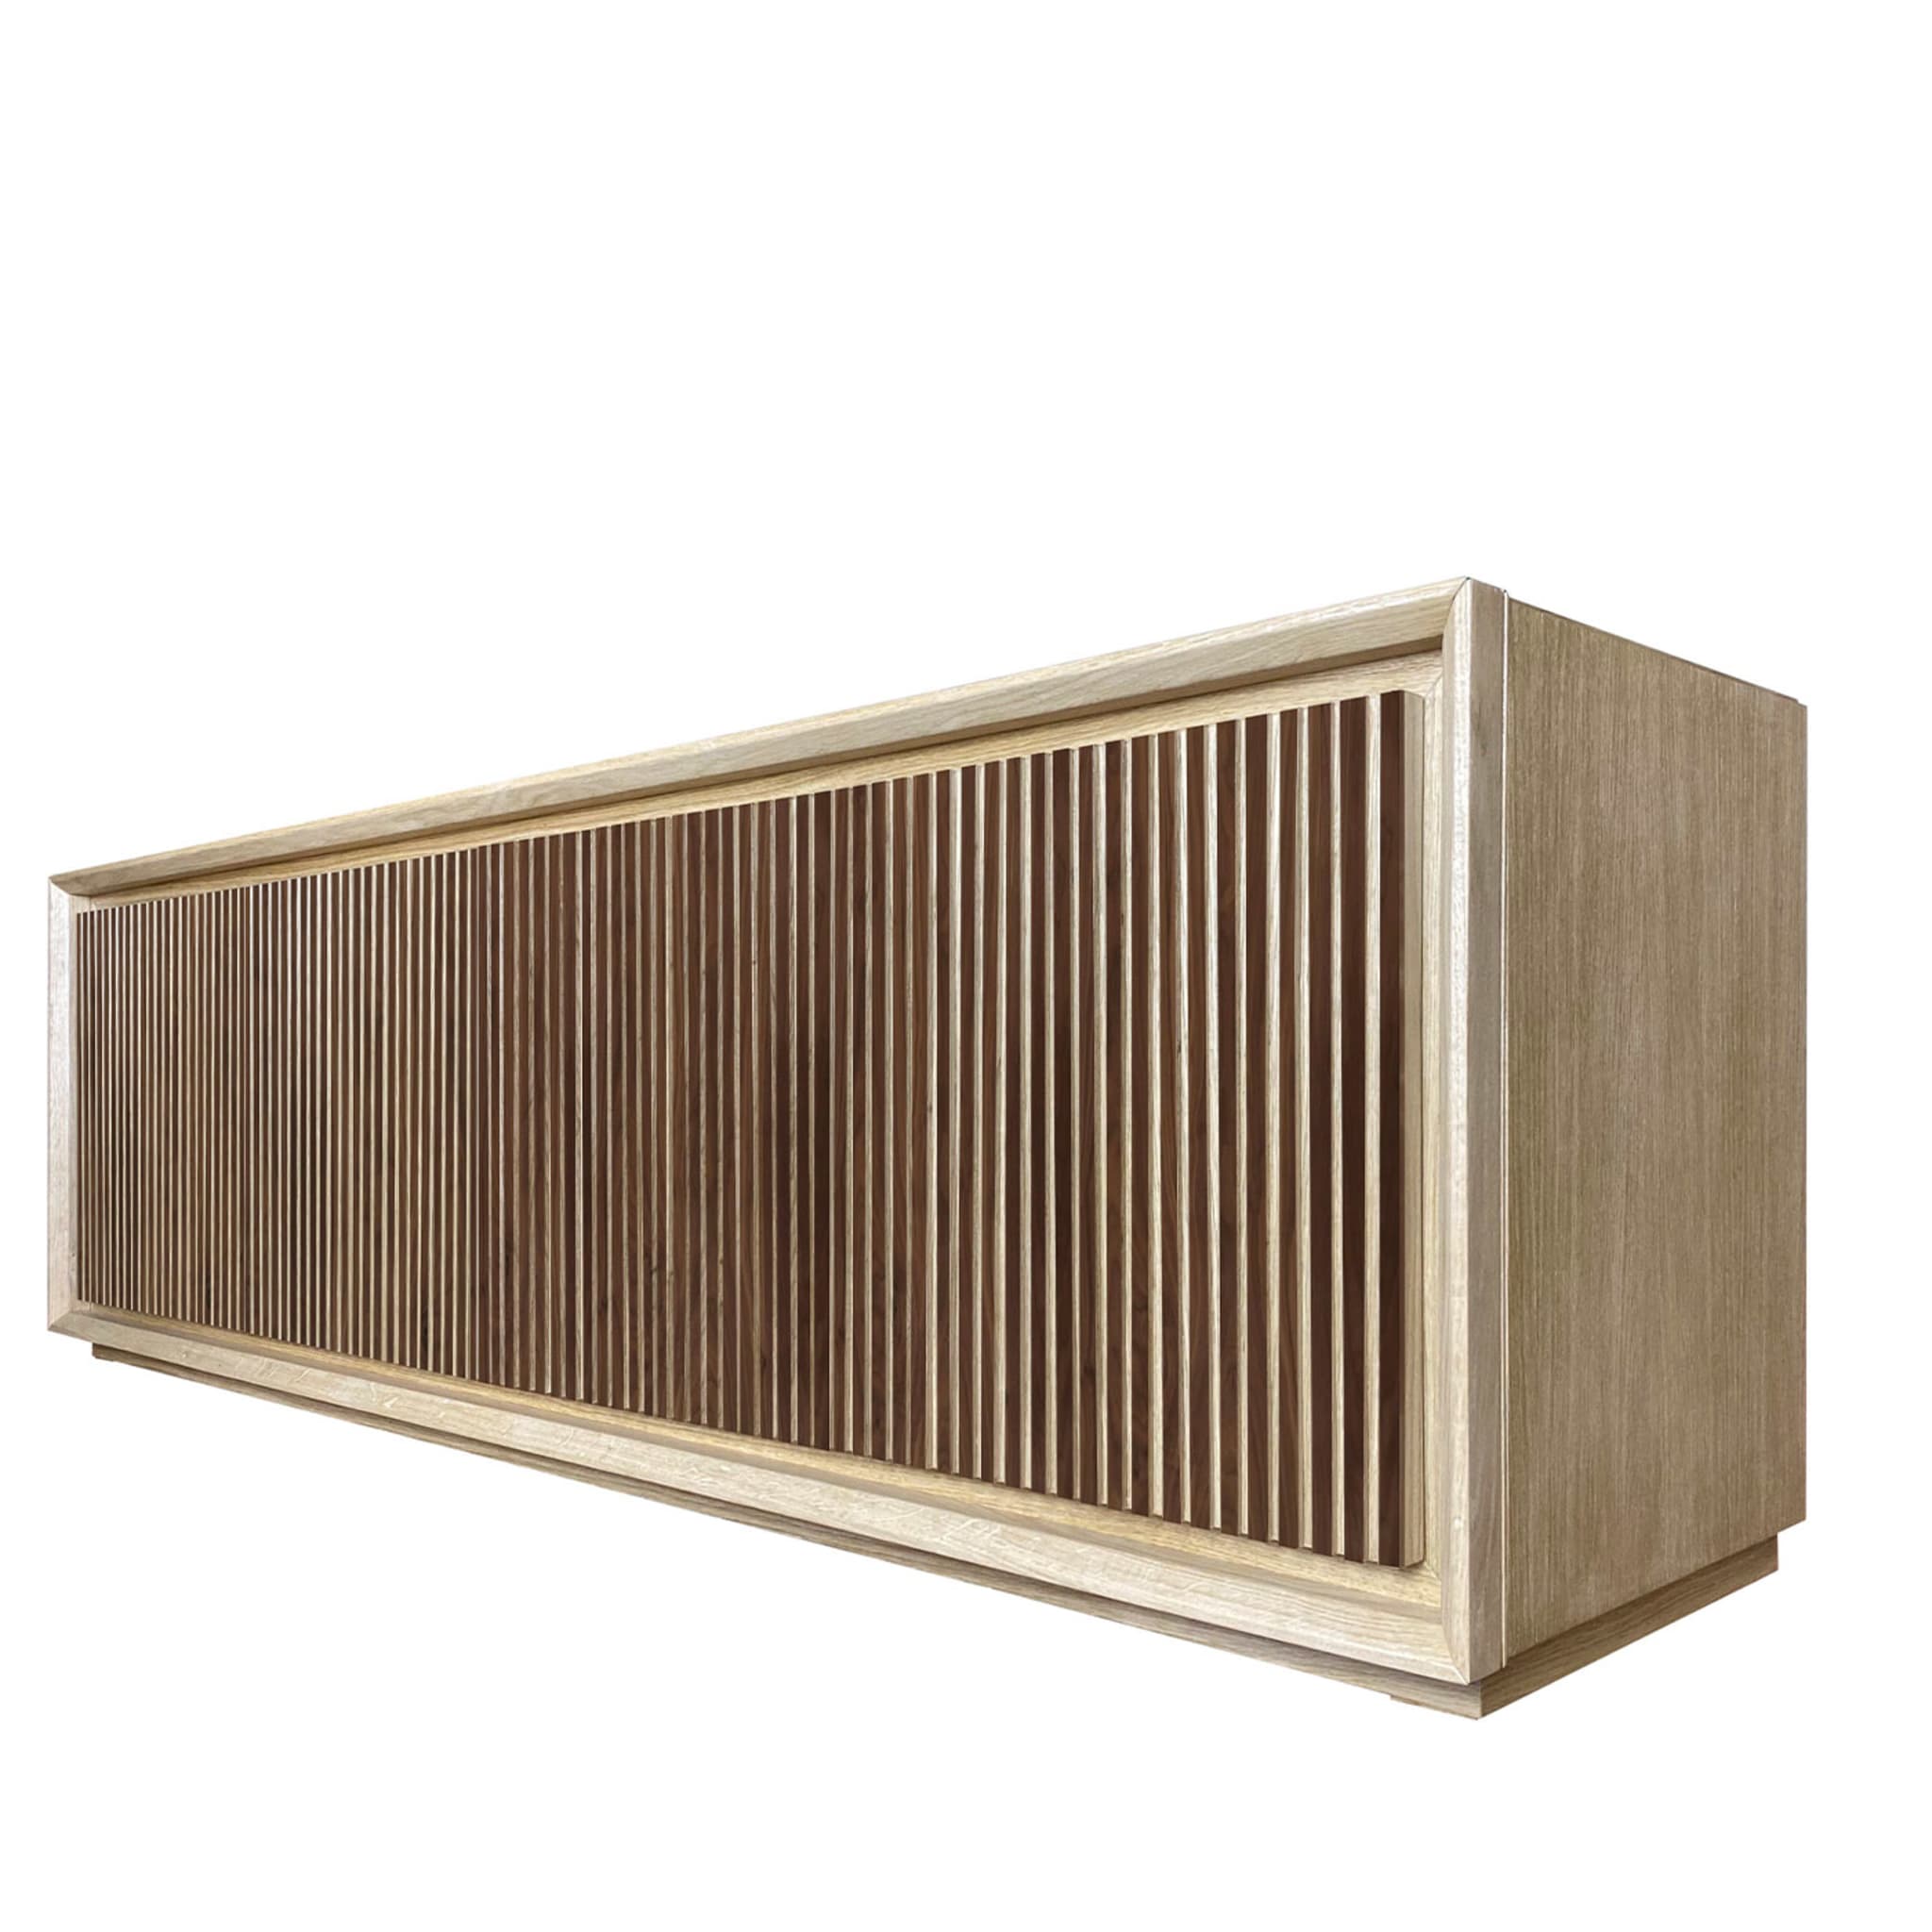 Fuga Noce Due 4-Door Grooved Sideboard by Mascia Meccani - Alternative view 3